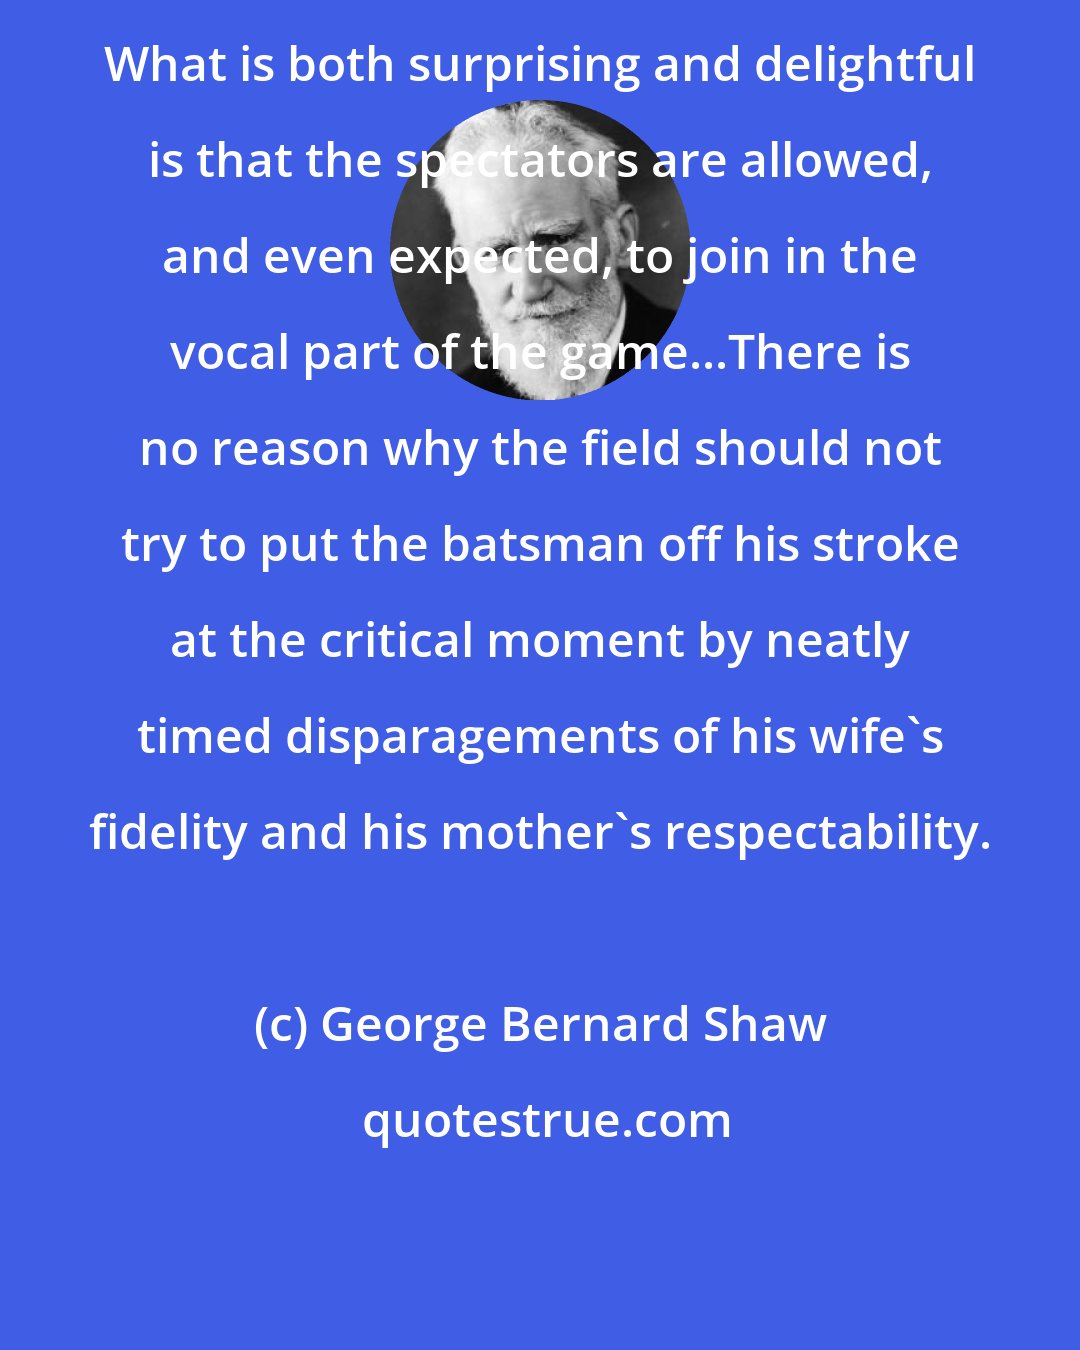 George Bernard Shaw: What is both surprising and delightful is that the spectators are allowed, and even expected, to join in the vocal part of the game...There is no reason why the field should not try to put the batsman off his stroke at the critical moment by neatly timed disparagements of his wife's fidelity and his mother's respectability.